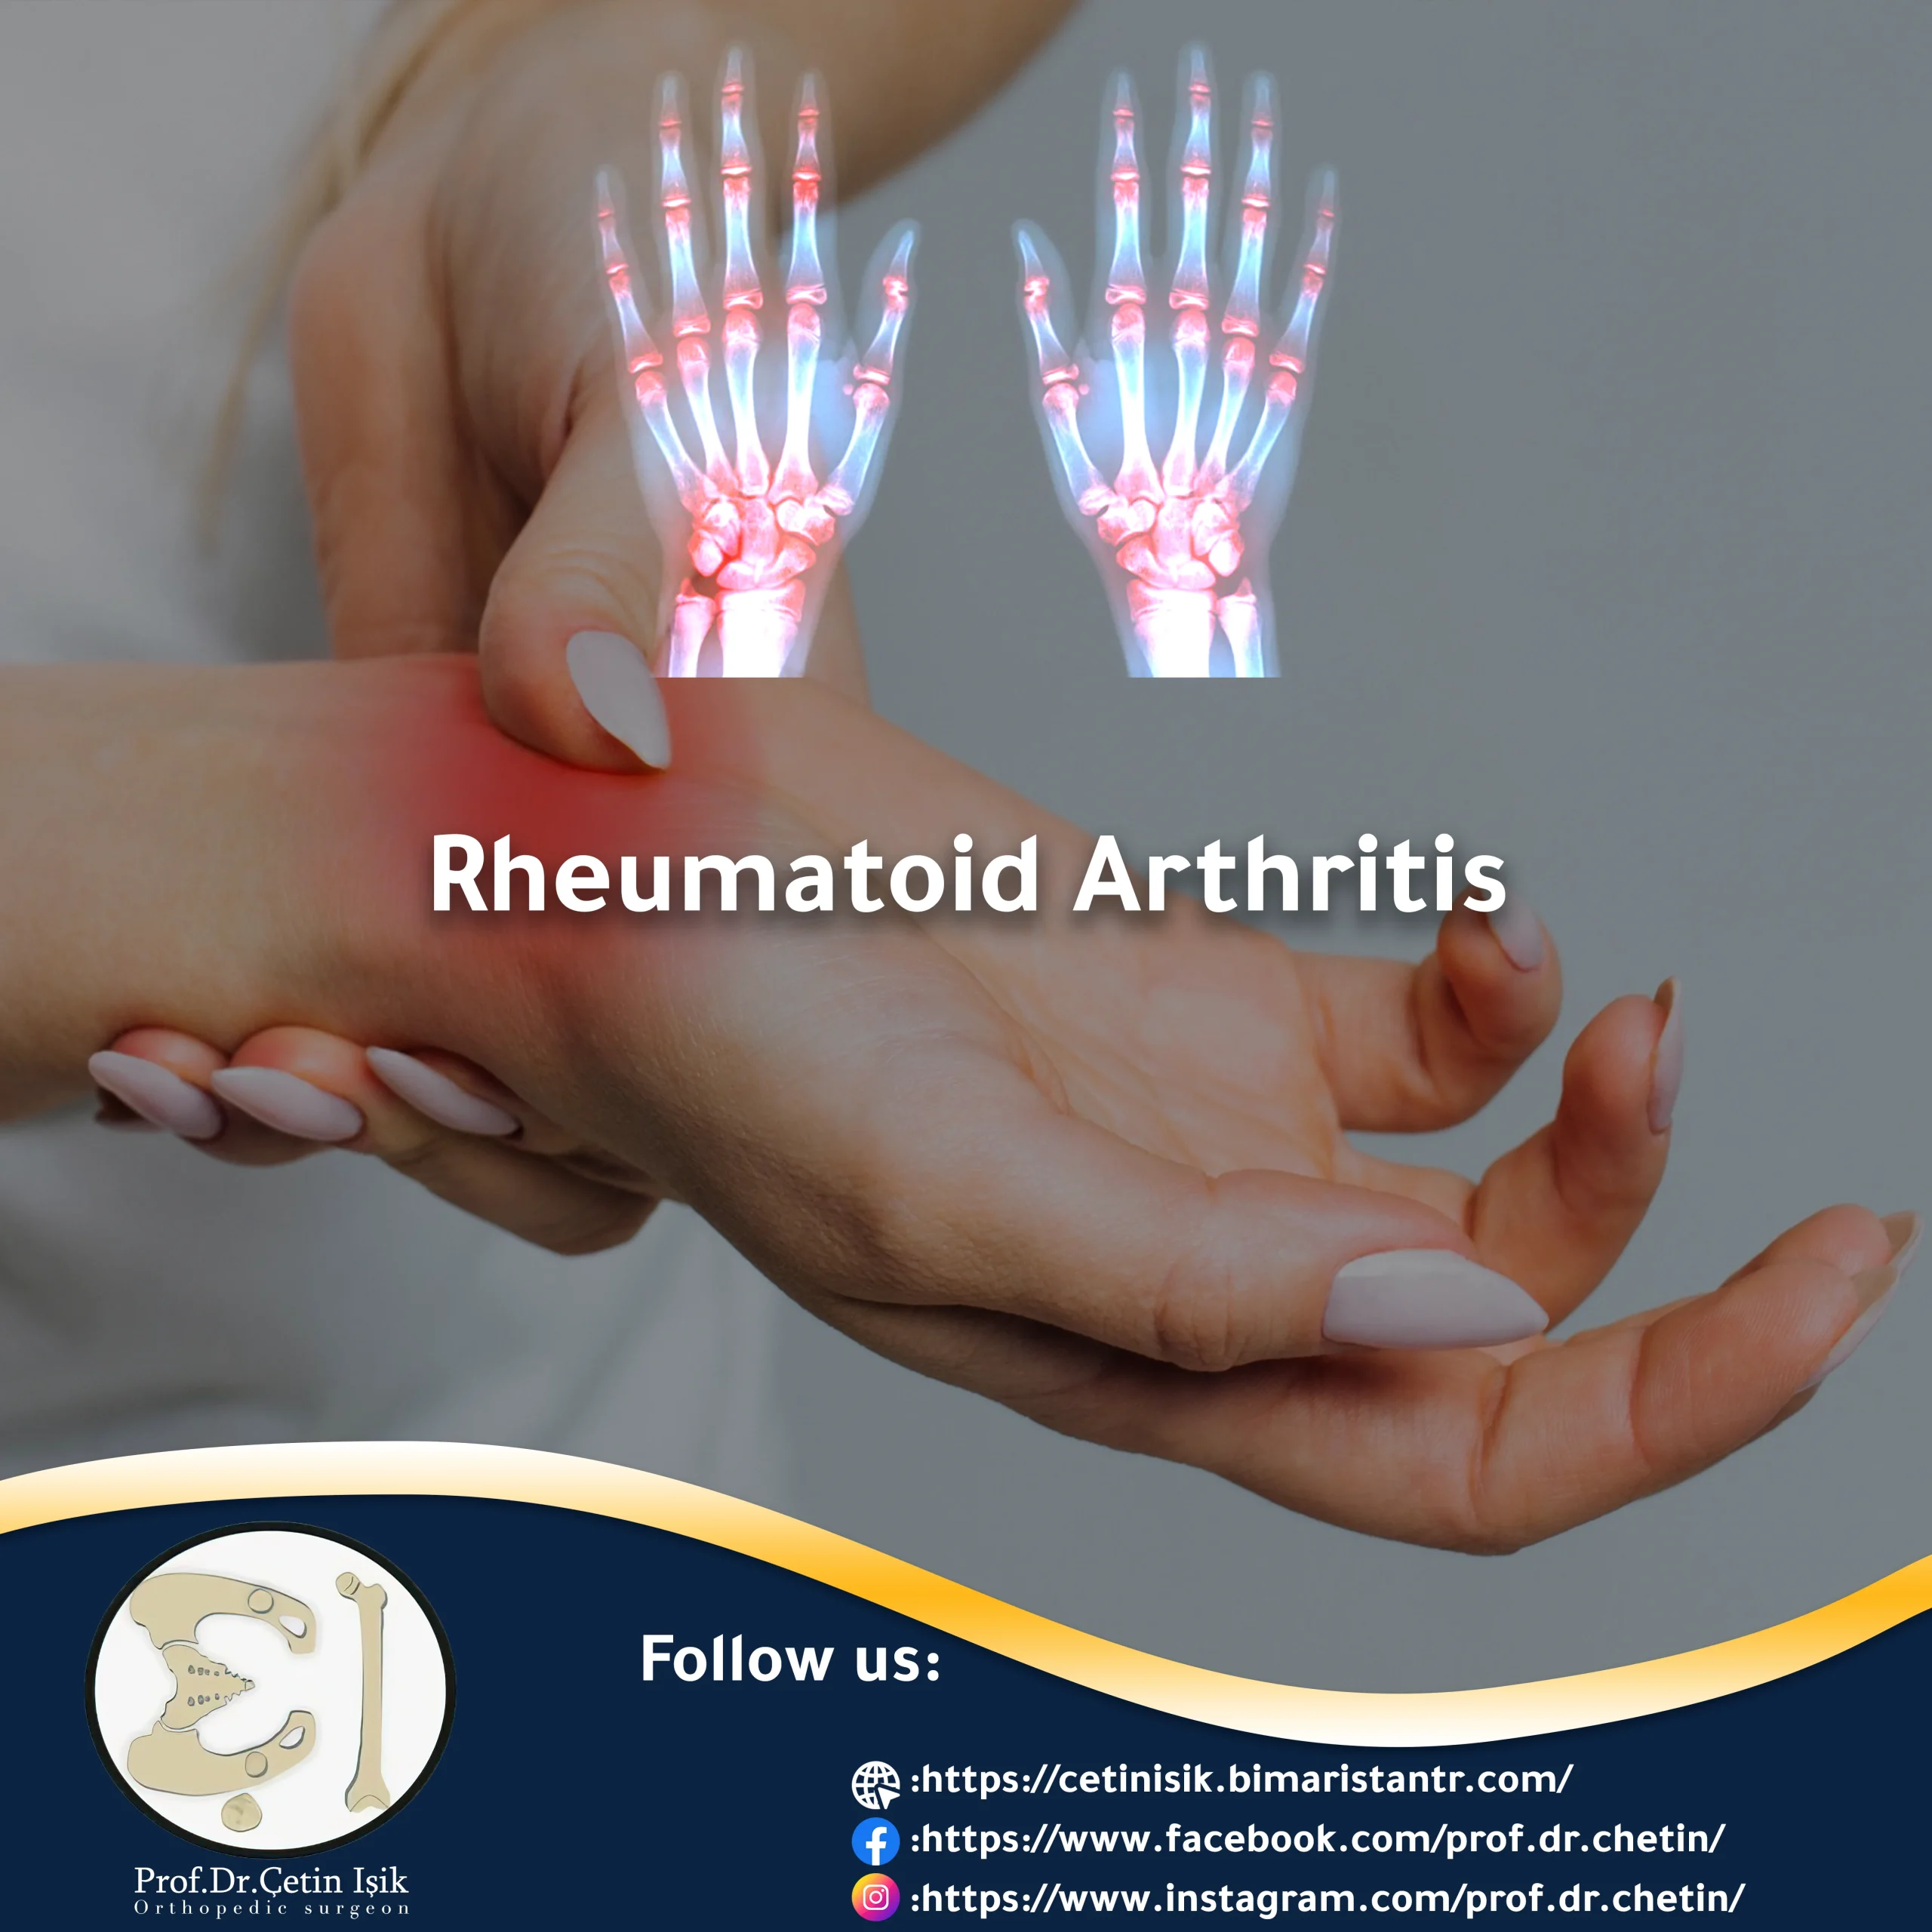 Picture showing rheumatoid arthritis in the fingers